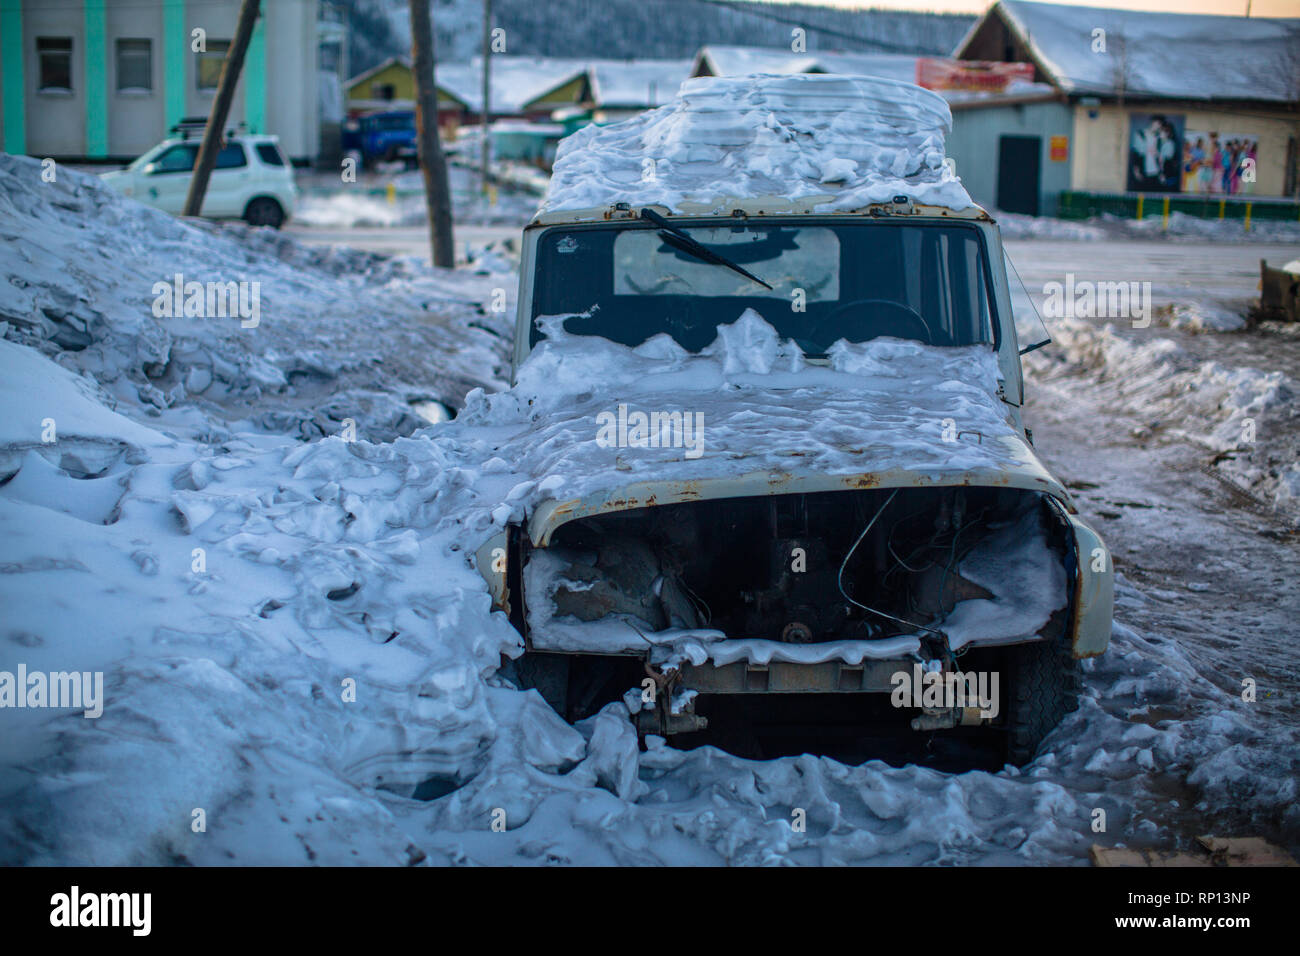 A still functioning Soviet era UAZ-469 jeep parked and stuck in the snow, Batagay, Russia Stock Photo